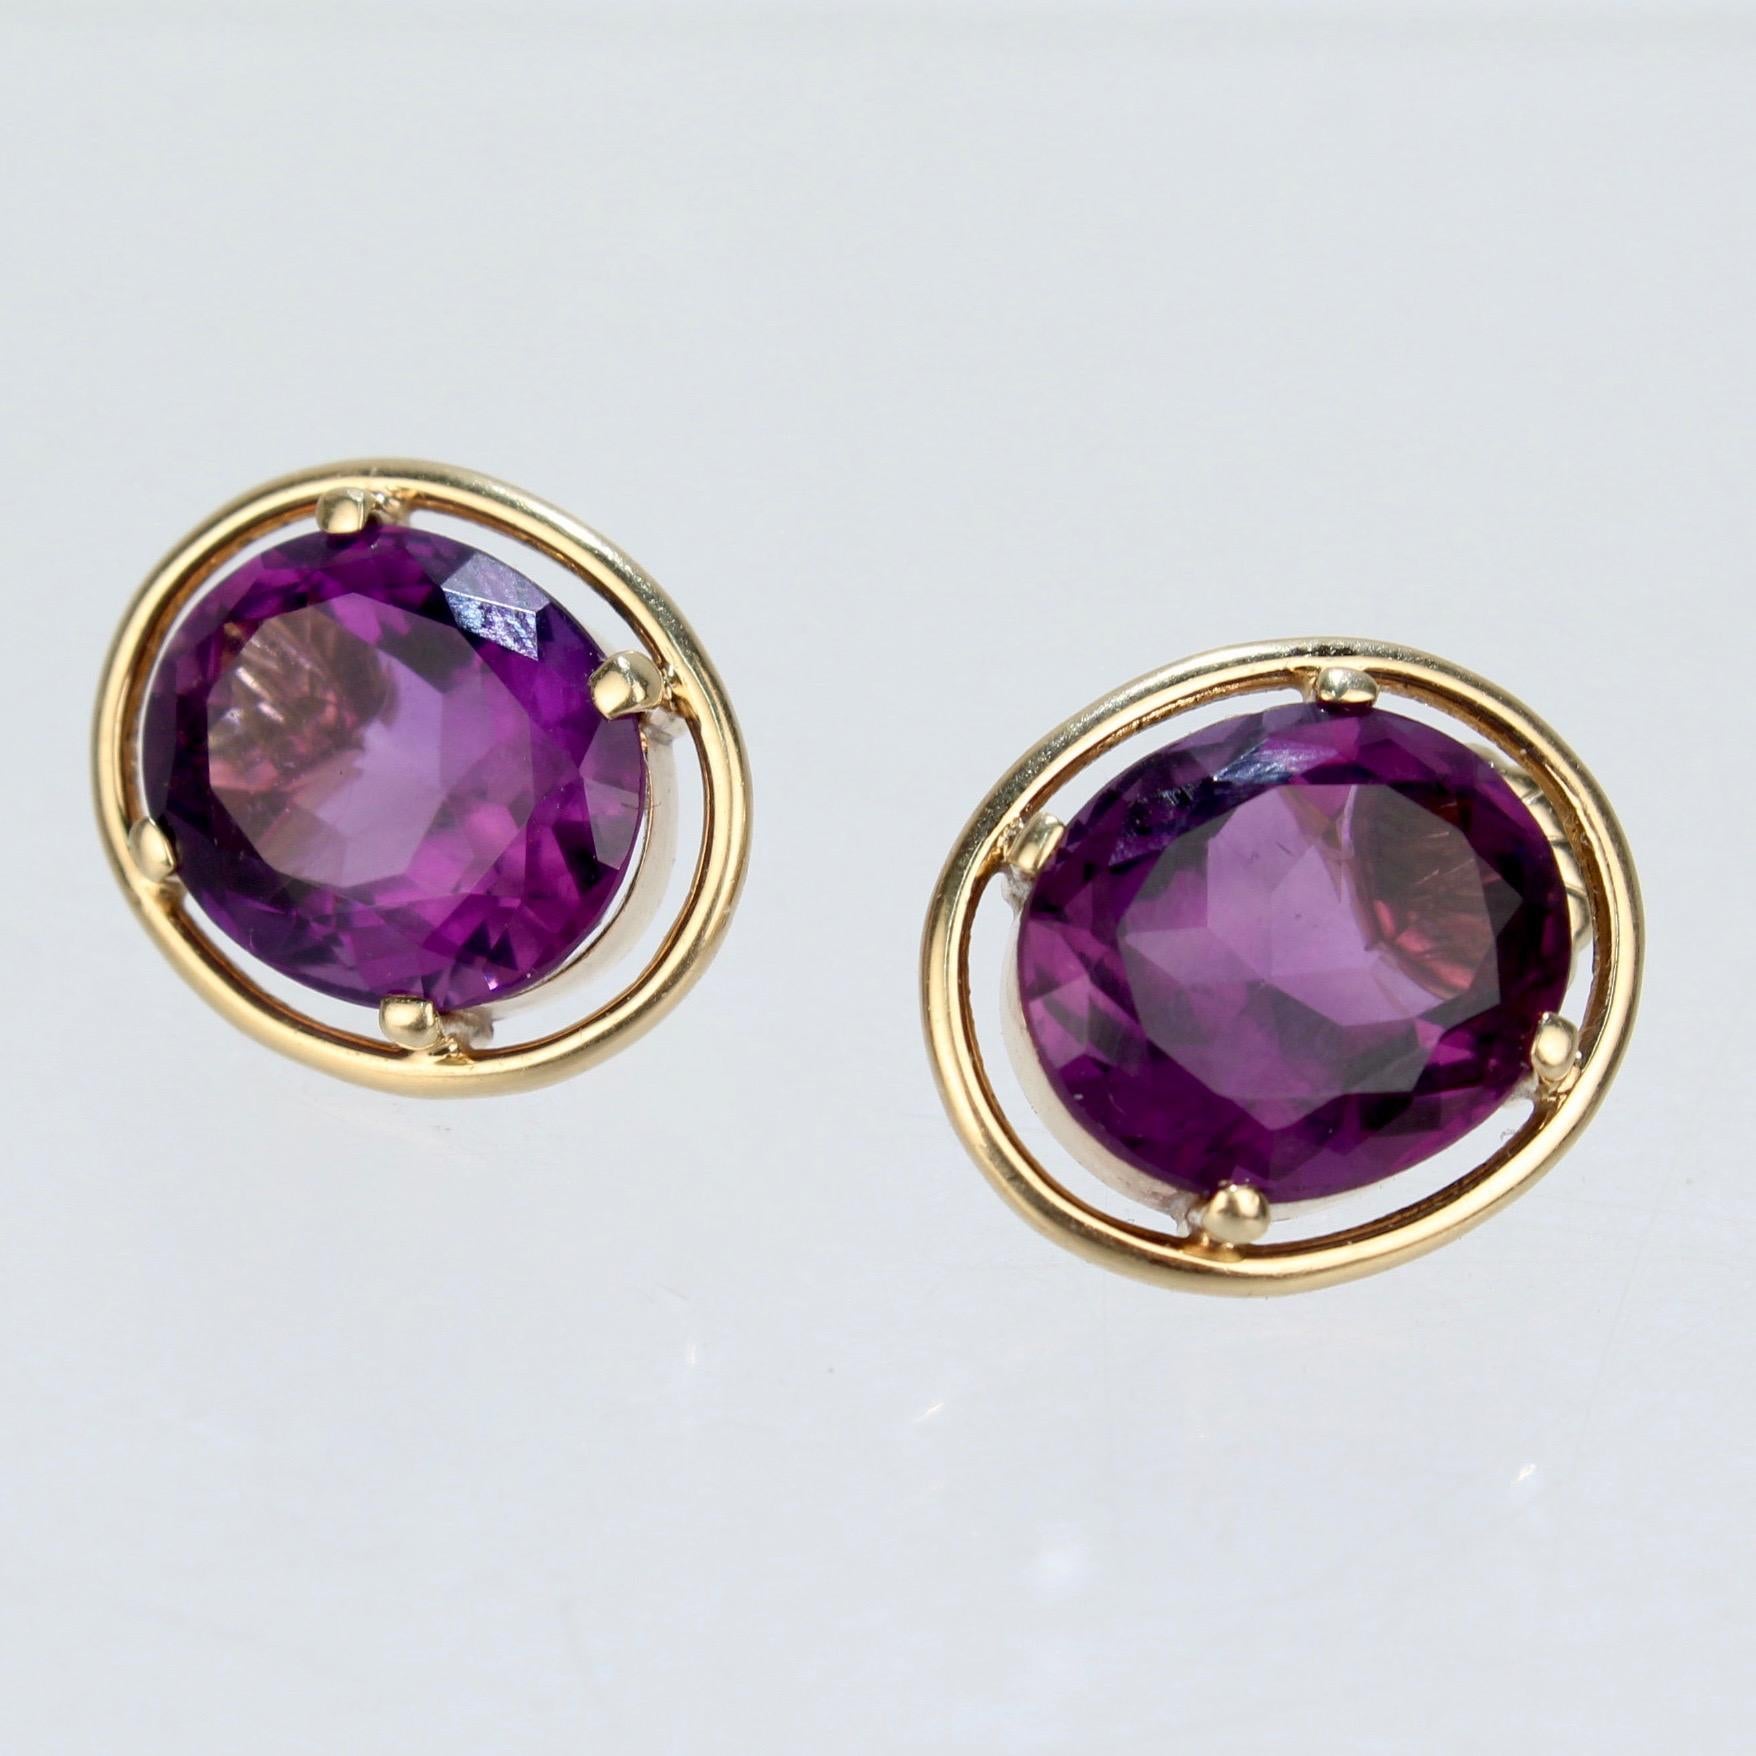 A fine pair of 14k gold and purple spinel earrings.

With gorgeous oval-cut purple spinel gemstones prong set in a gold mount and encircled by a gold ring. 

Simply a wonderful pair of earrings!

Width: ca. 15mm
Length: ca. 18 mm
Spinel Width: ca.